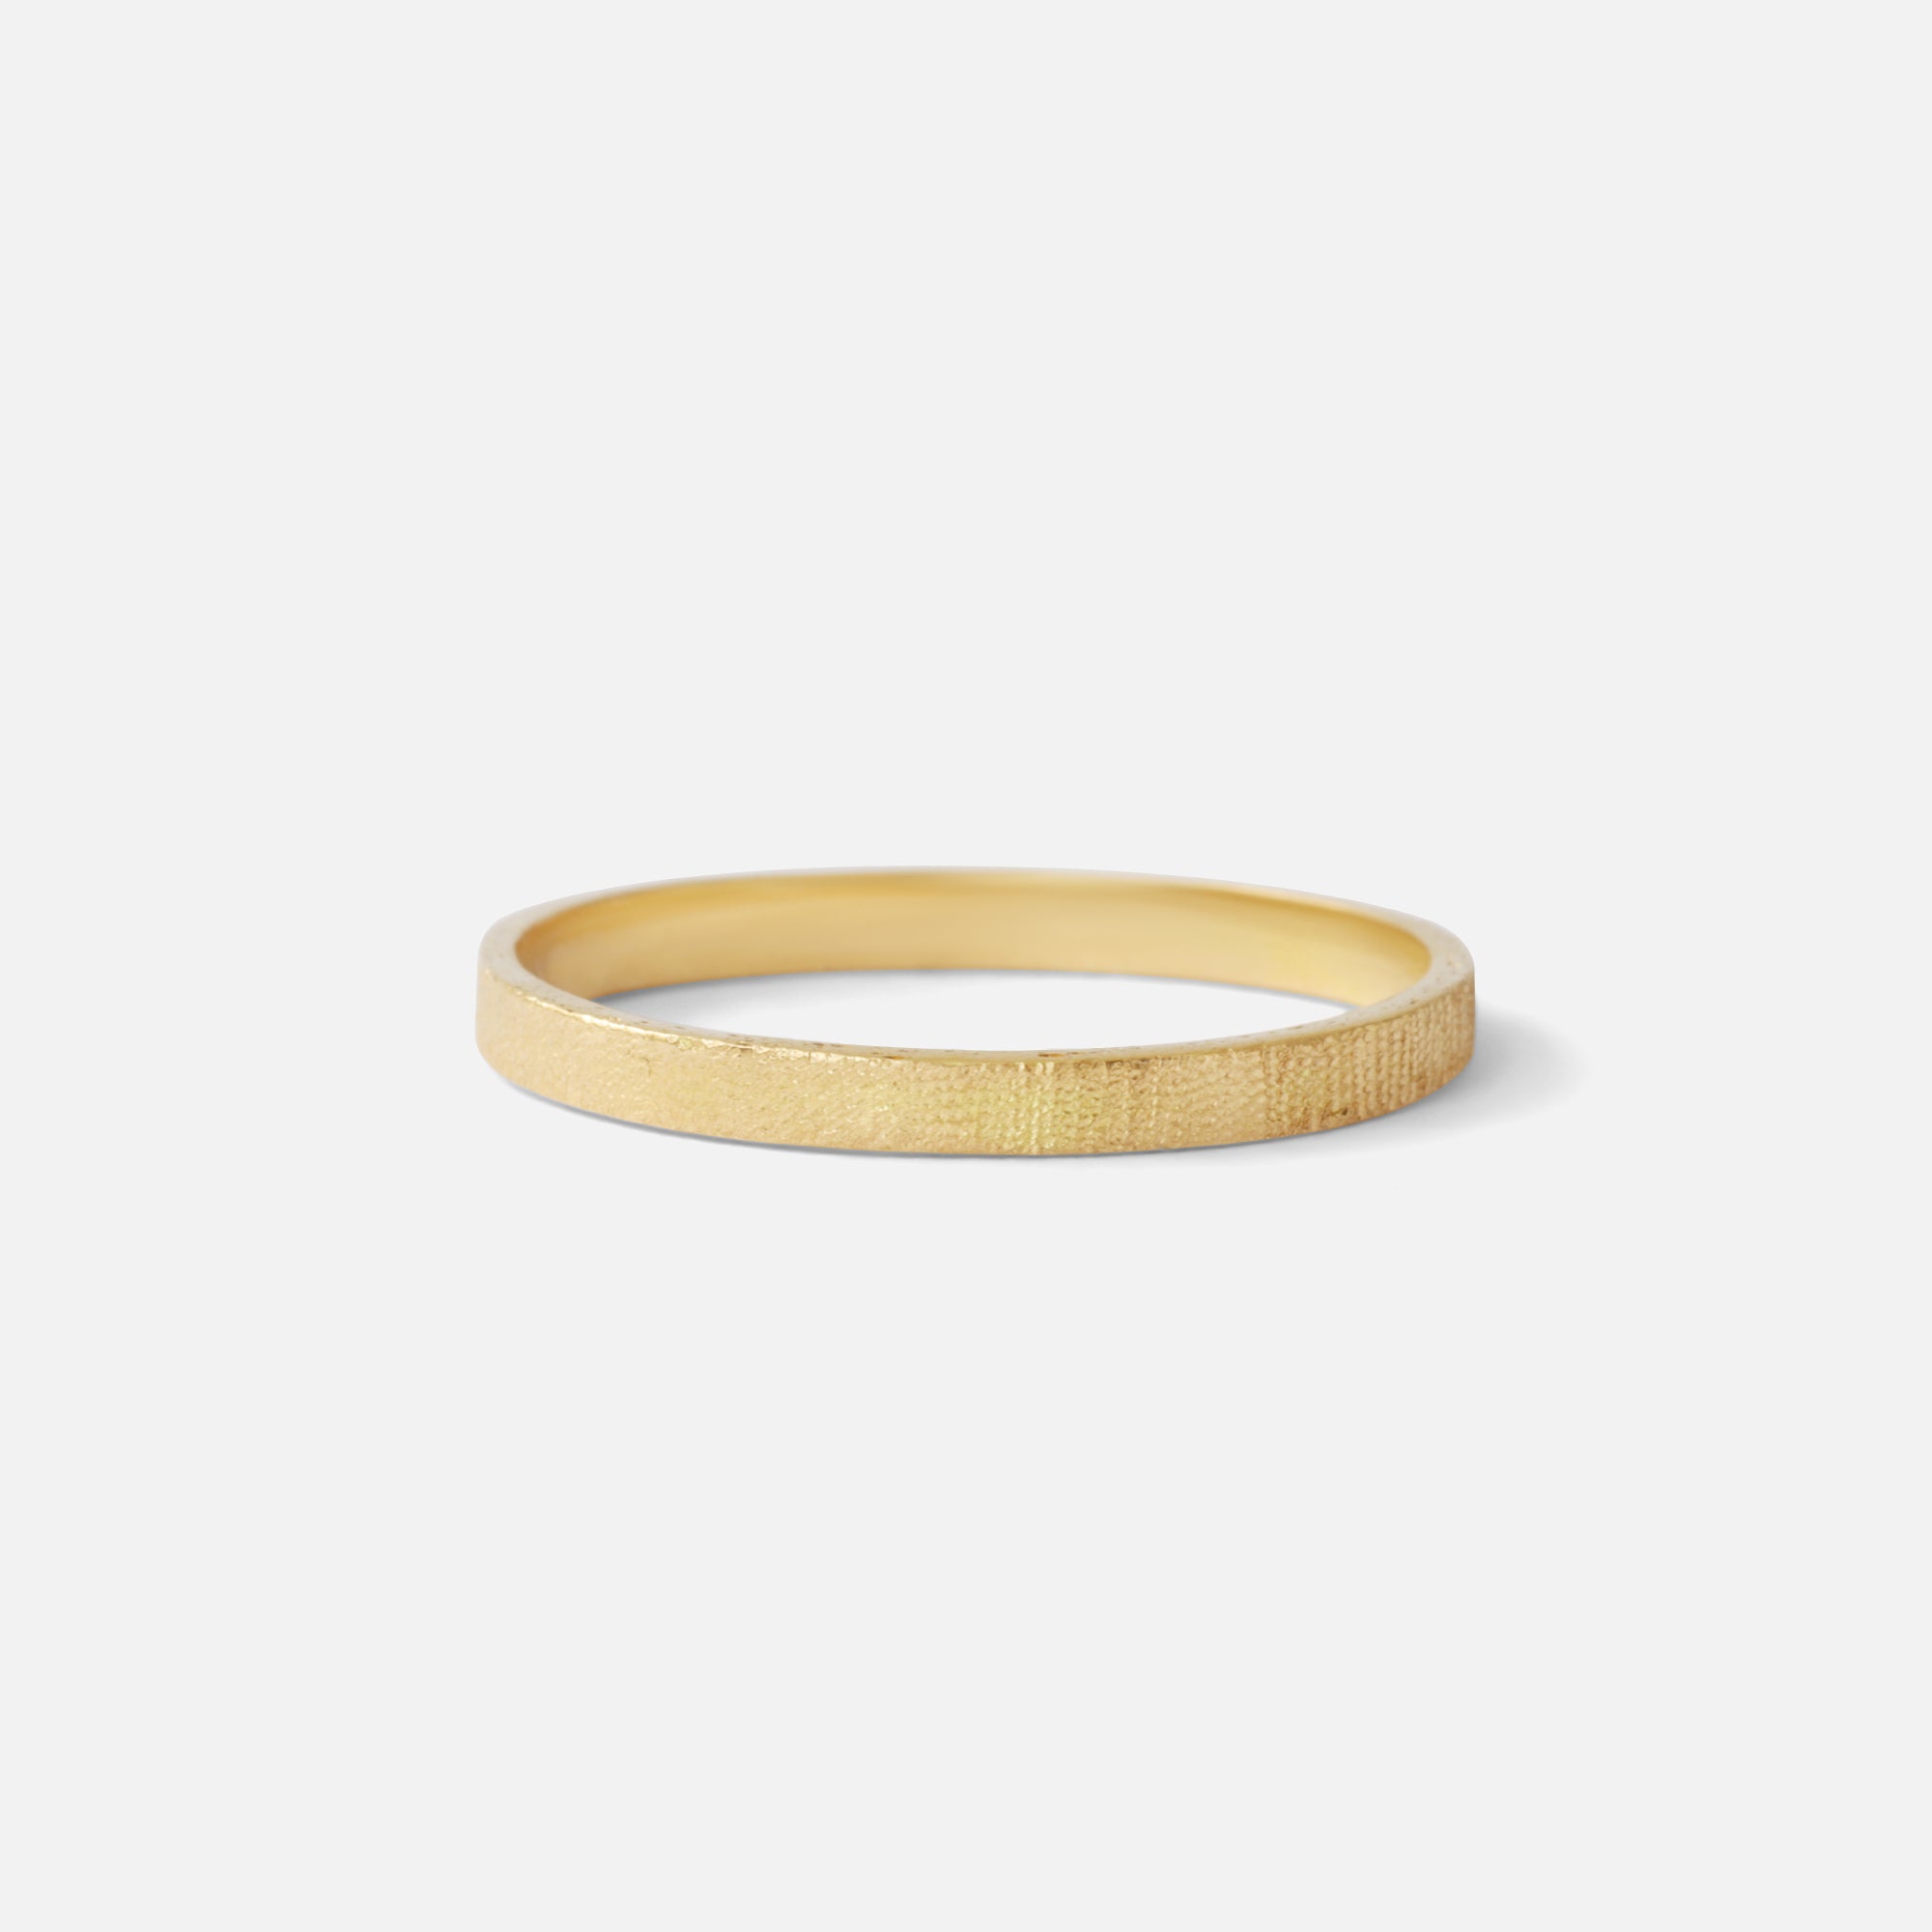 Hwan Ring By Young Sun Song in rings Category